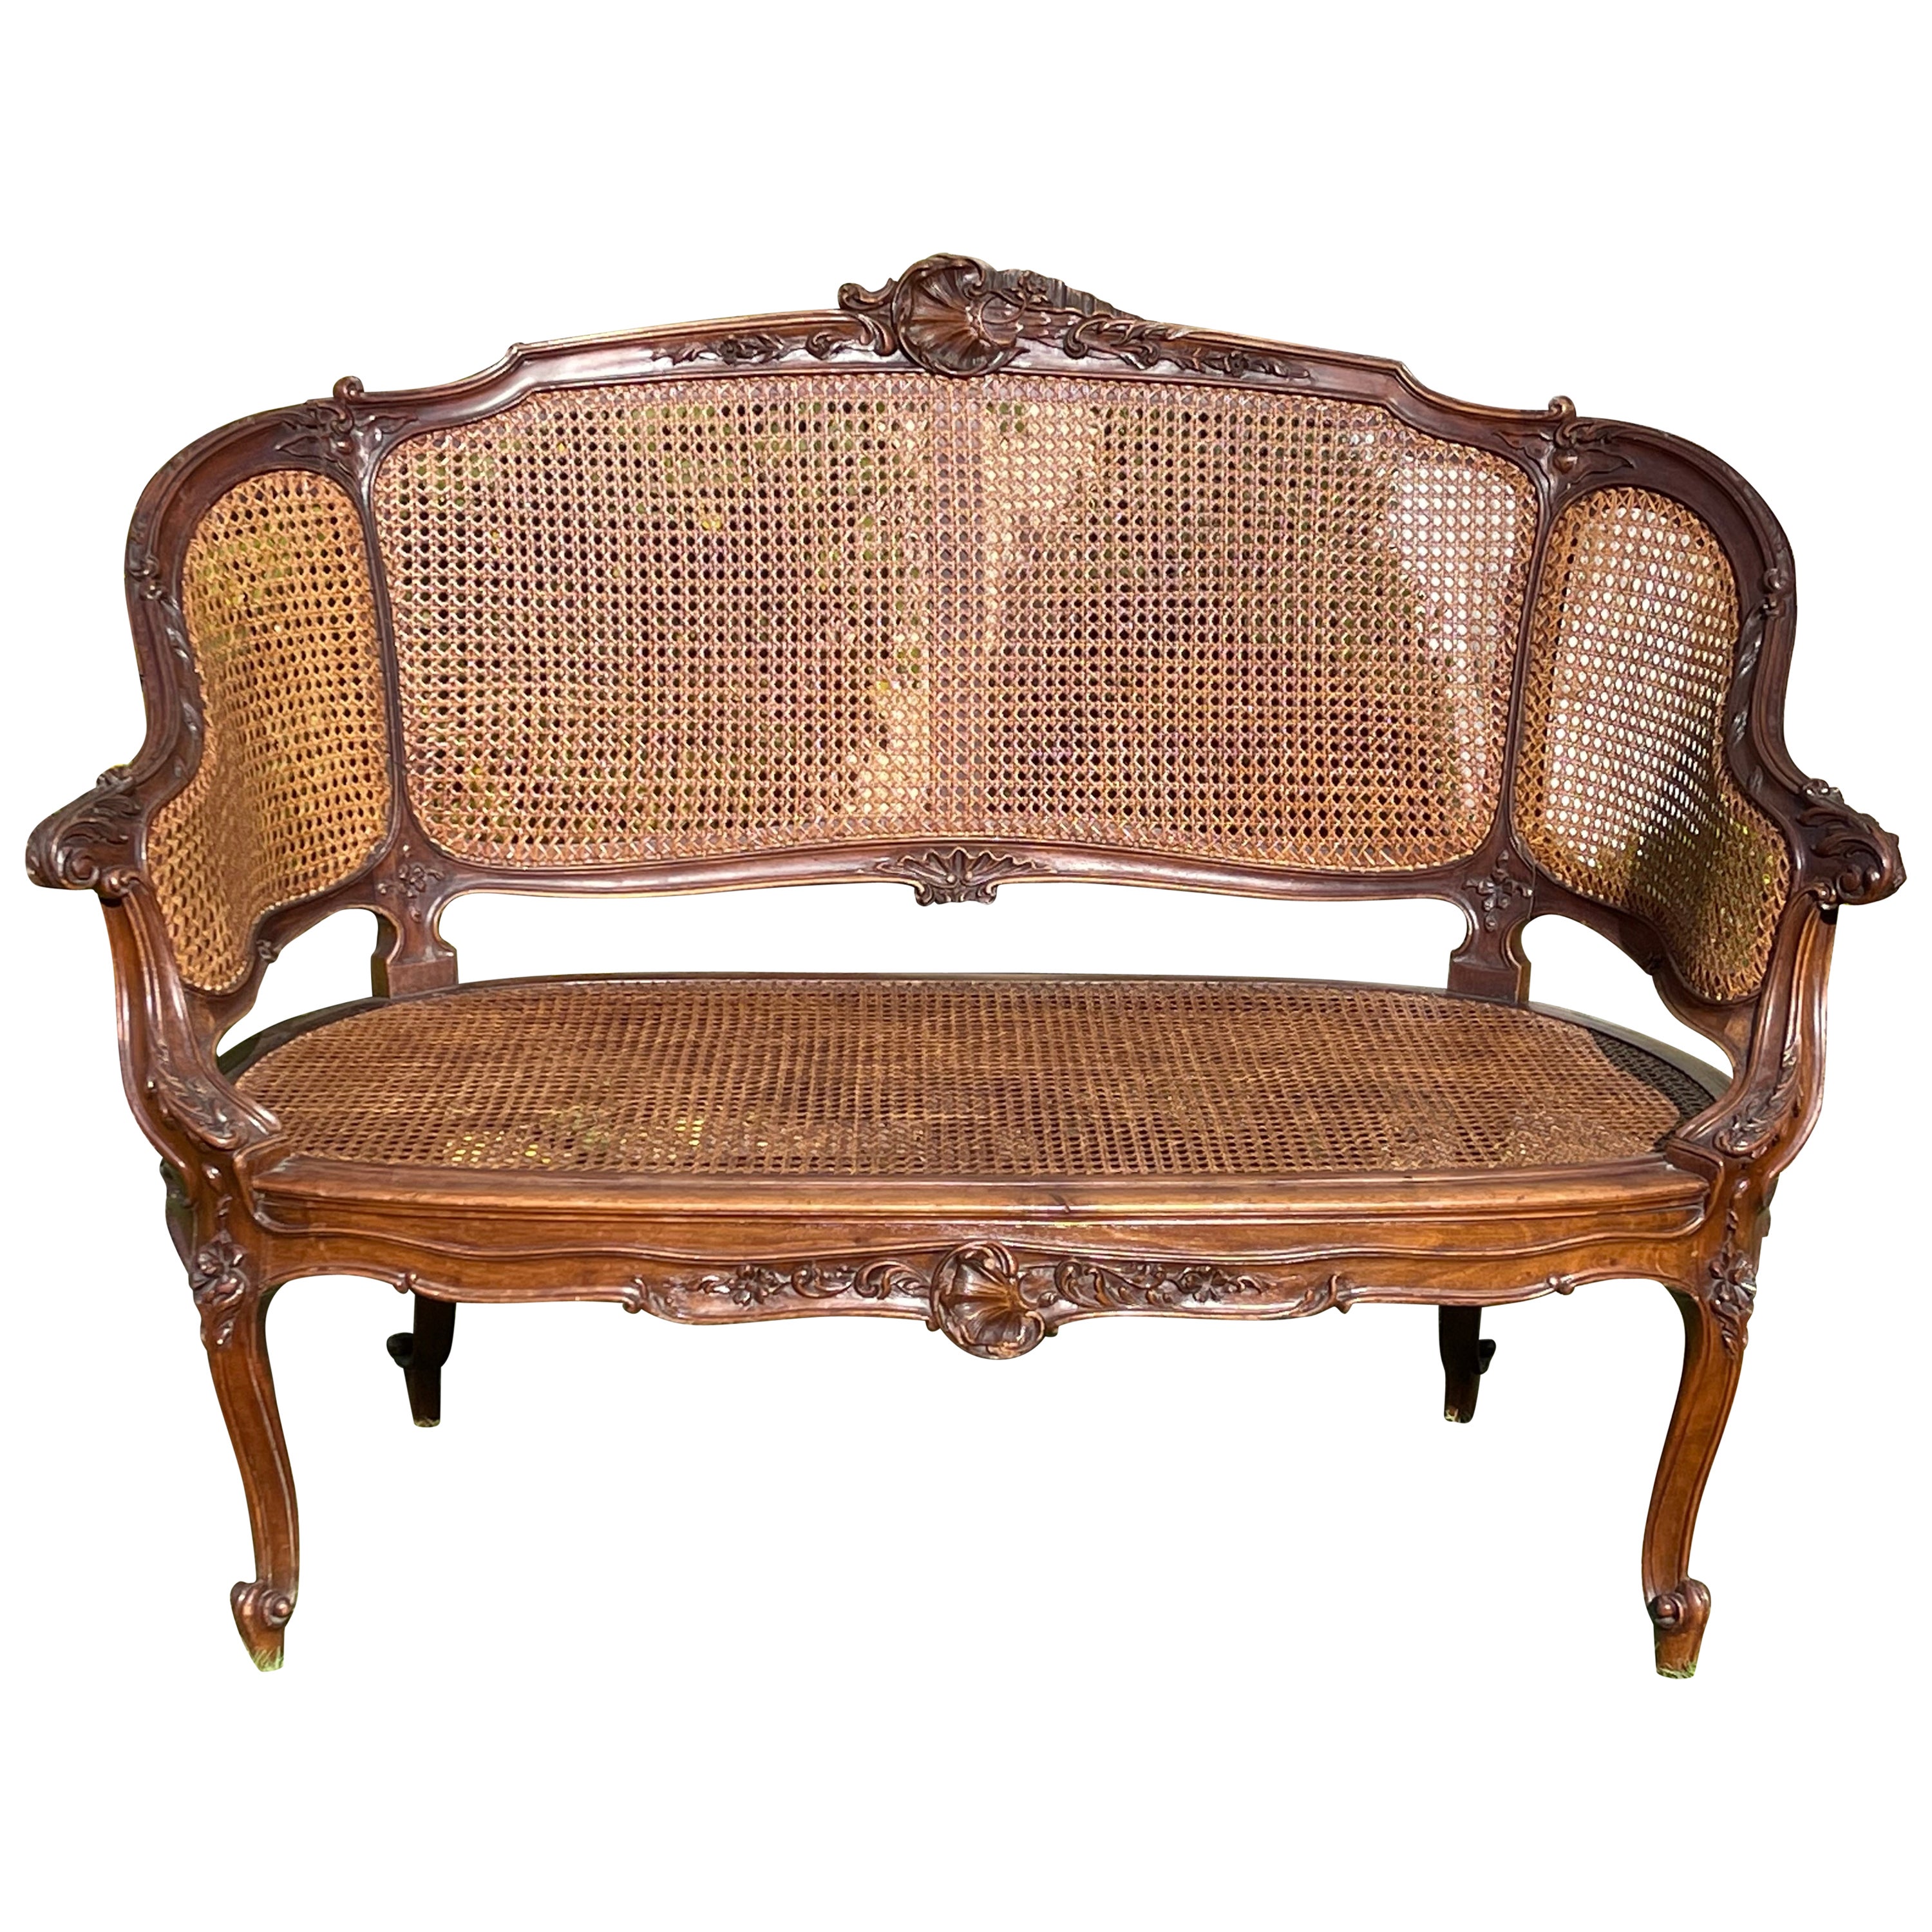 Louis XV Style, Walnut and Caning Sofa, 19th Century